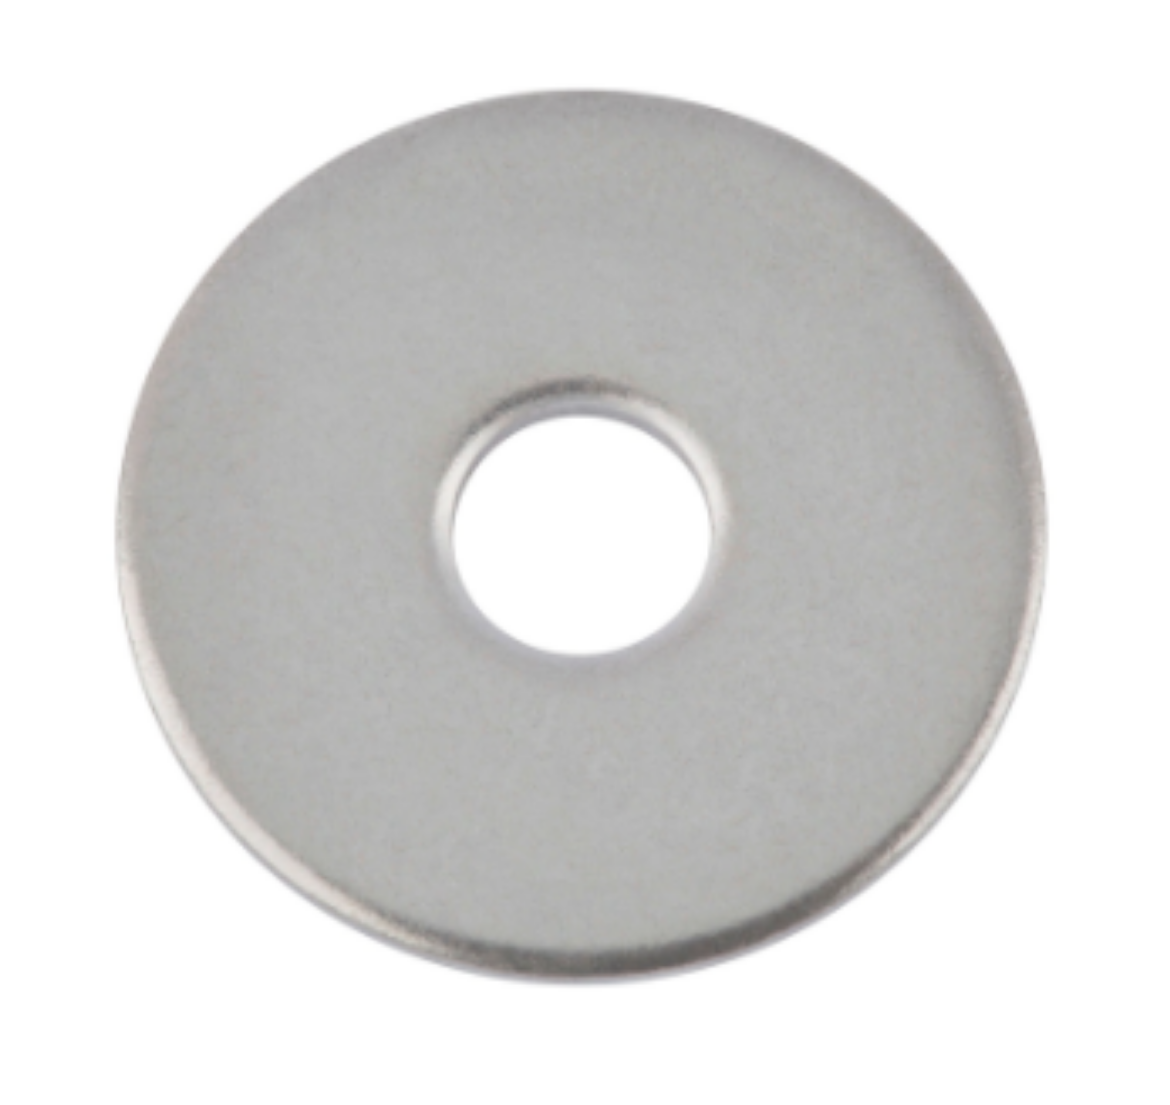 Picture of FENDER WASHER 3/8"x 1 x 16 ZINC